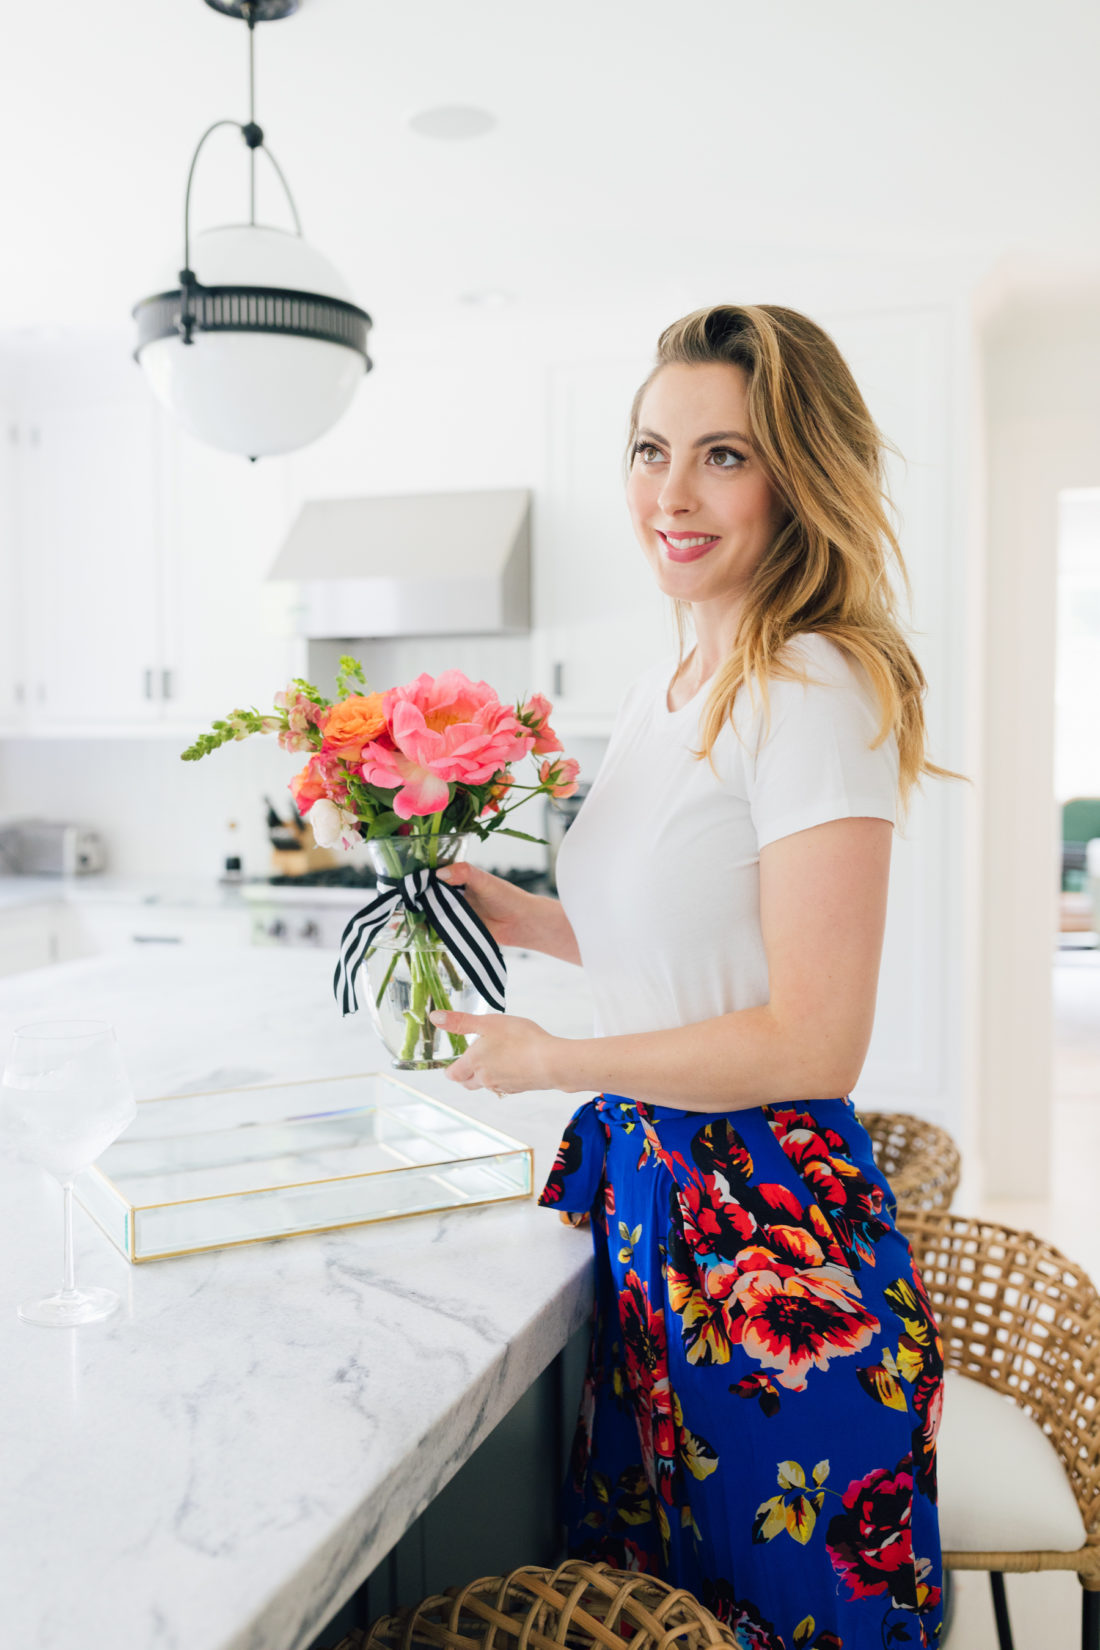 Eva Amurri Martino wears a crisp white t-shirt and a colorful skirt in her kitchen in Connecticut